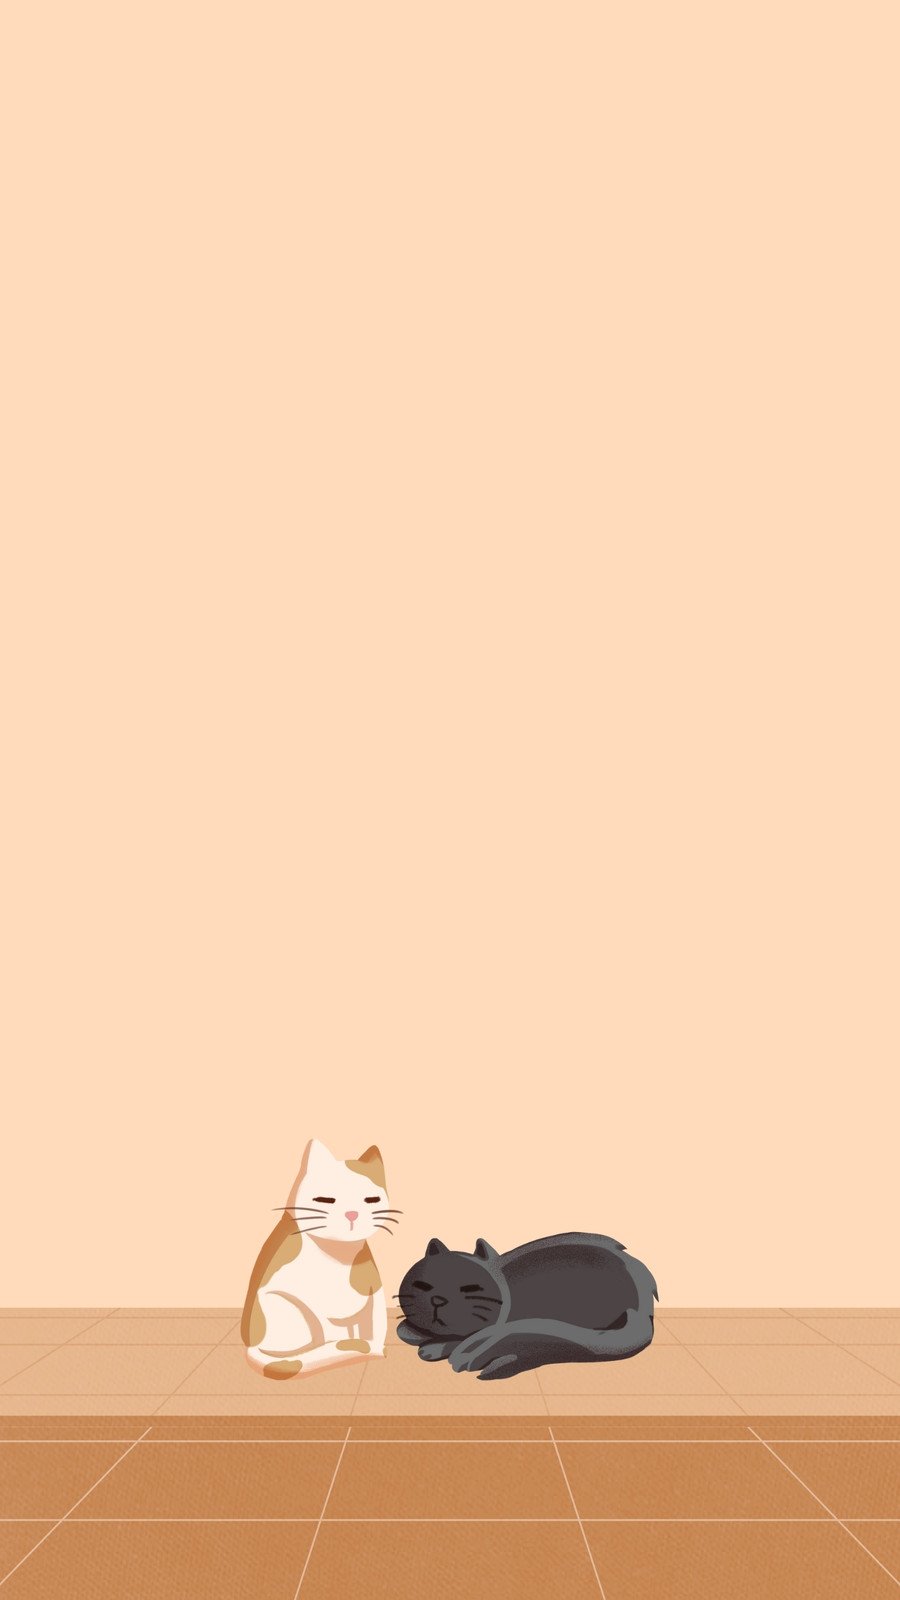 200+] Anime Cat Wallpapers | Wallpapers.com